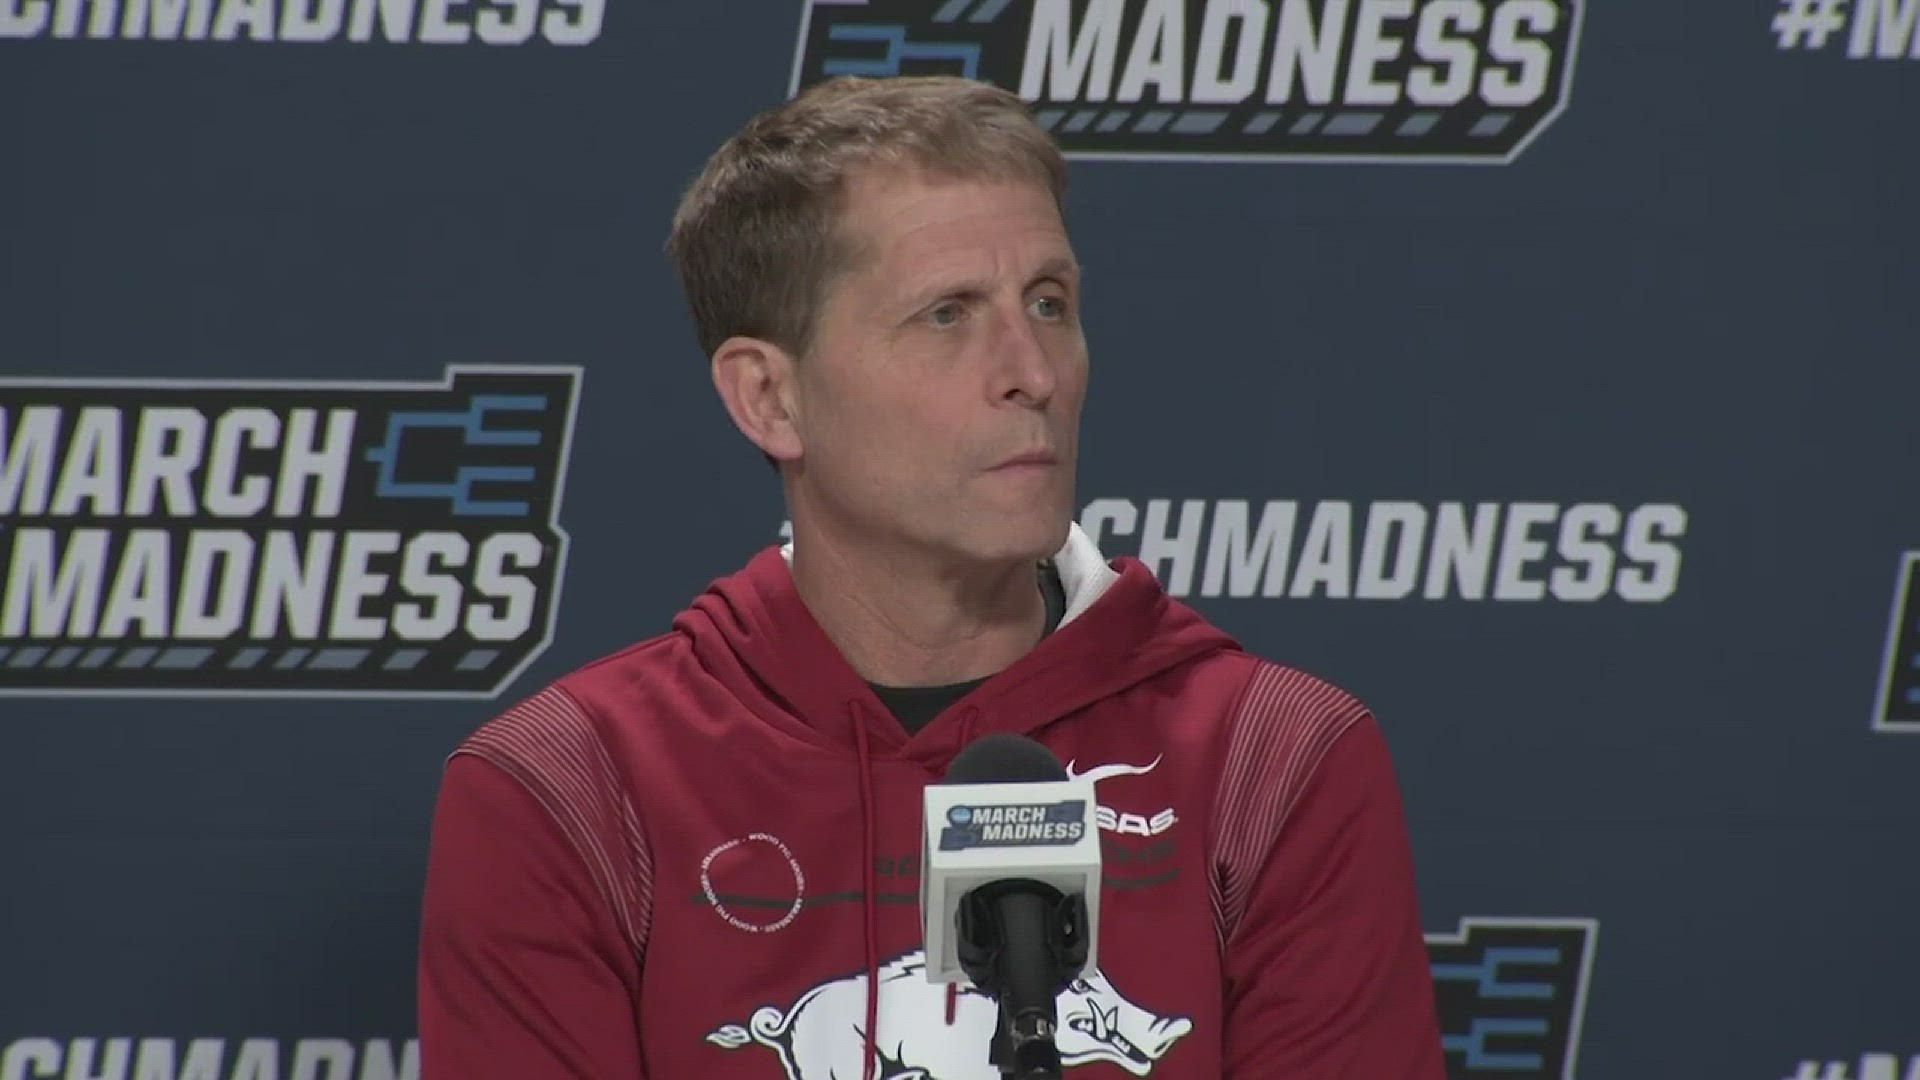 Muss talks the challenges of facing a one seed for the third straight season.